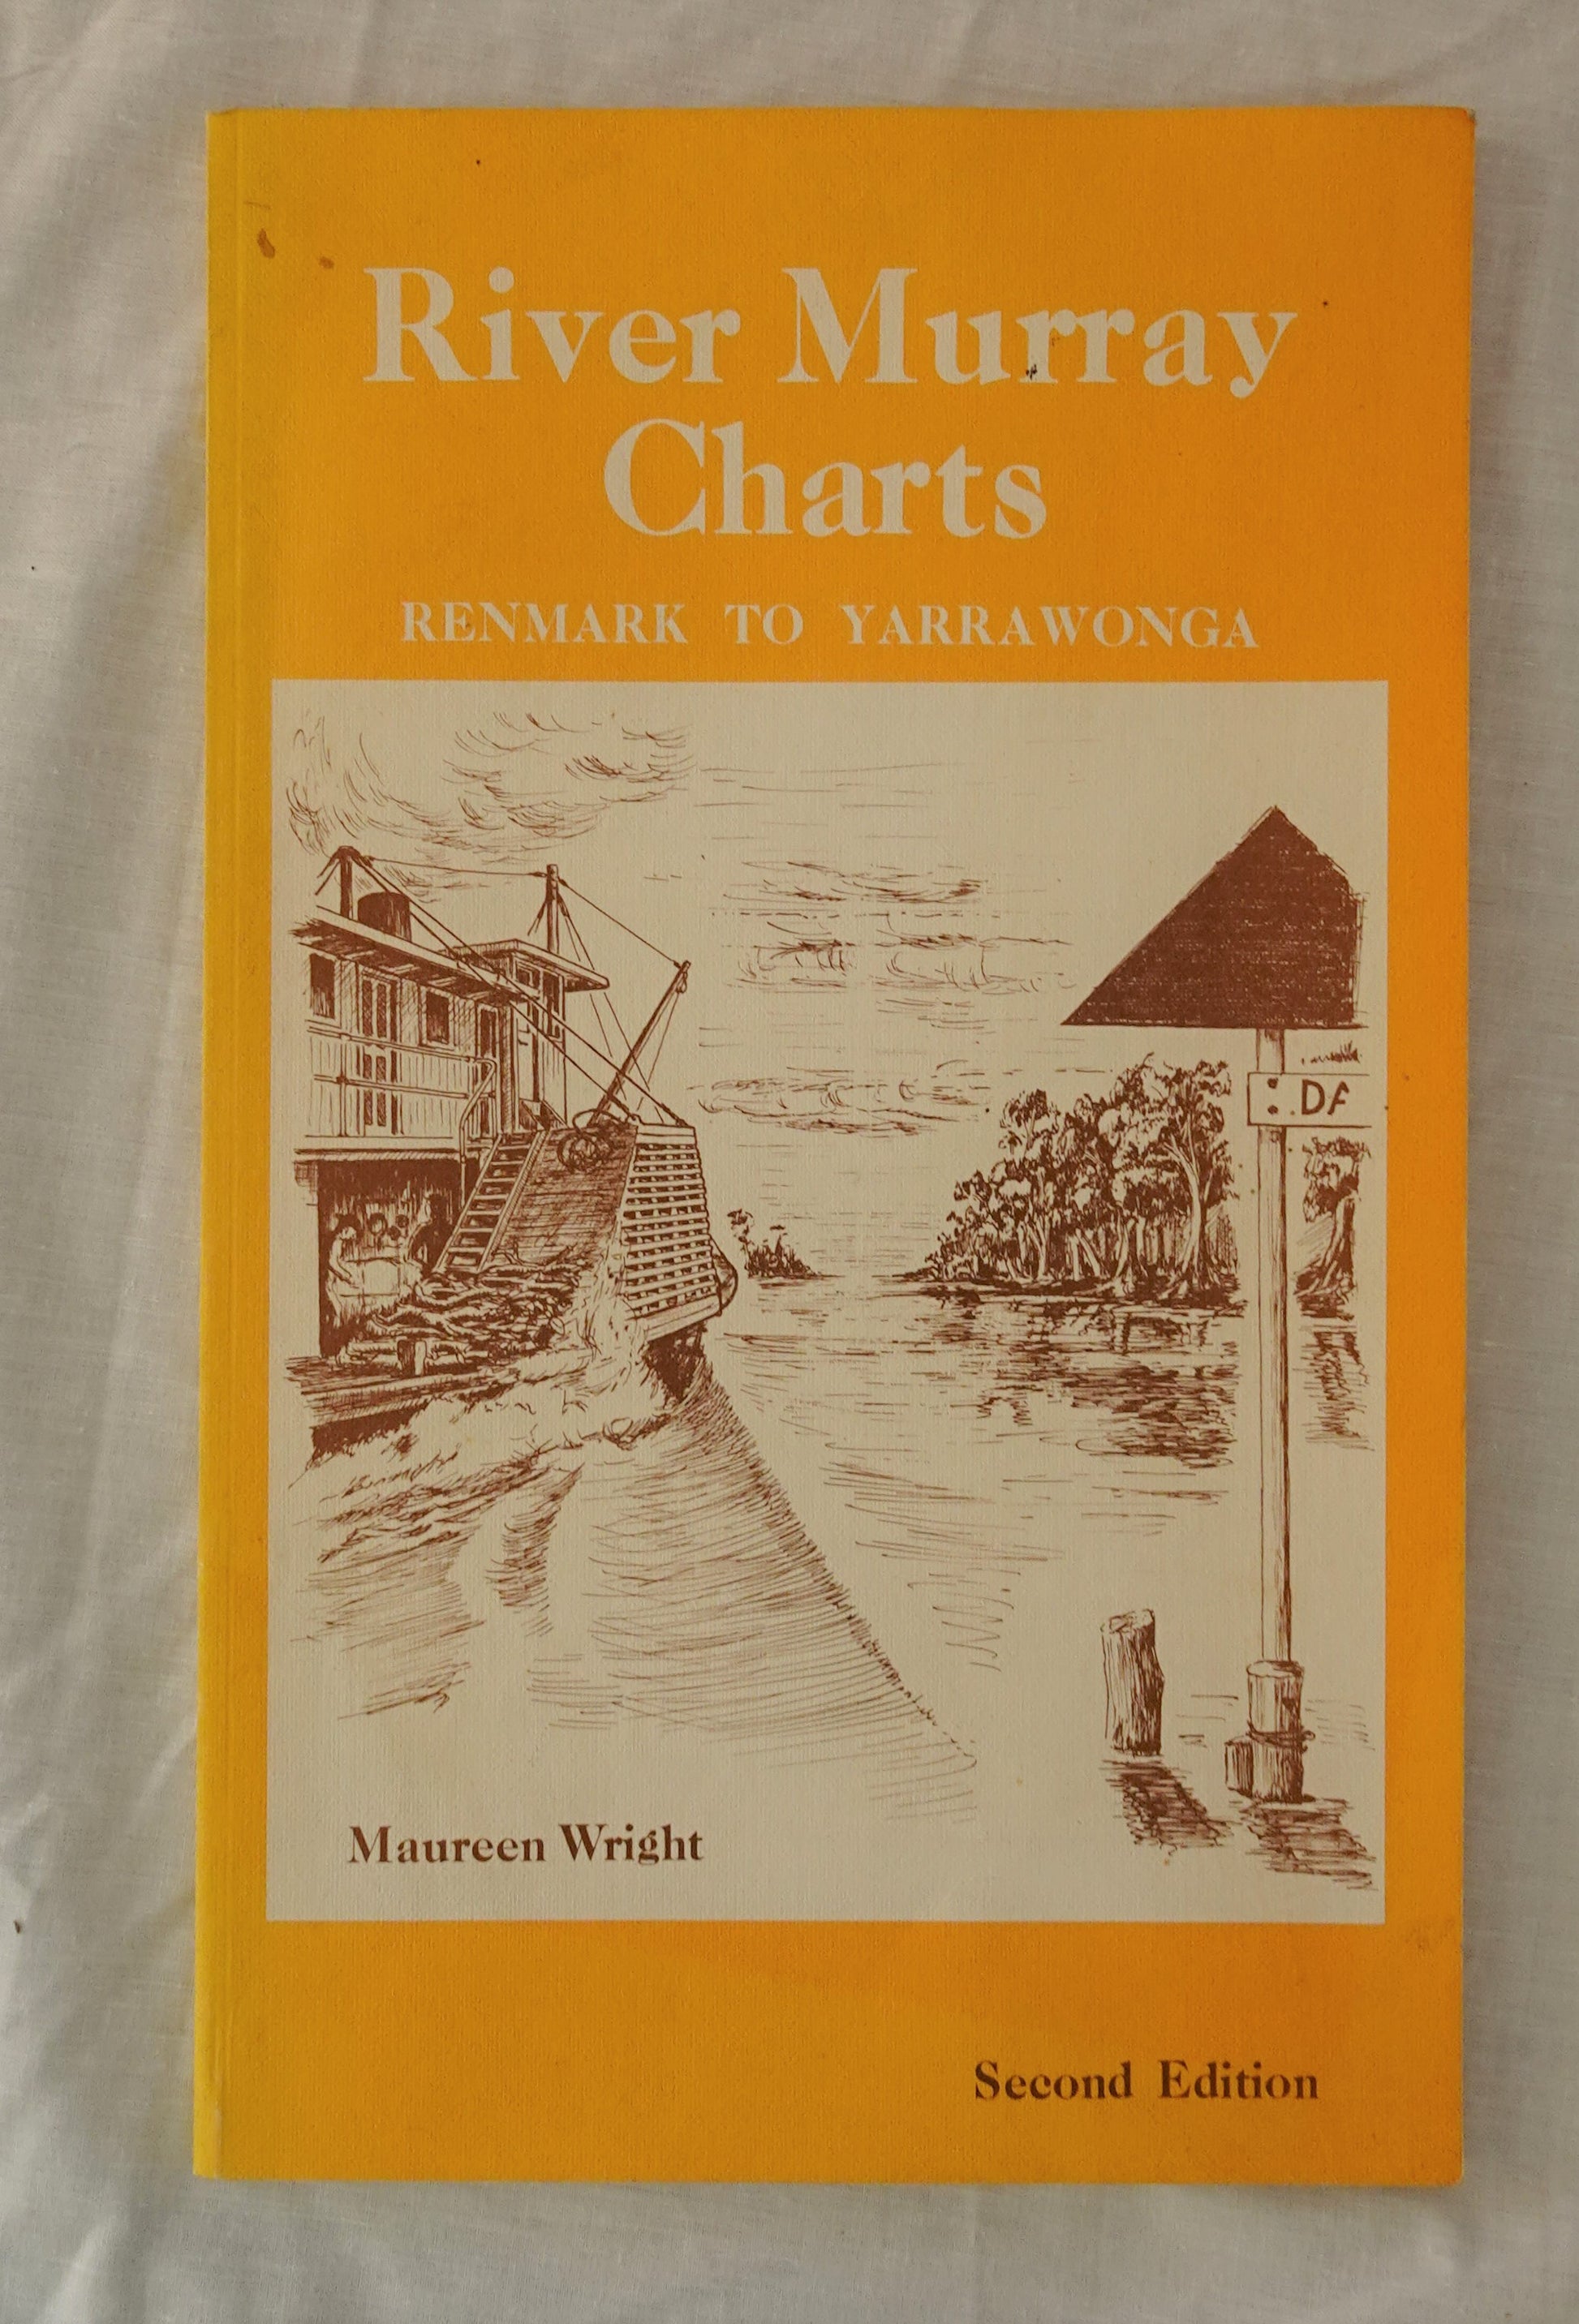 River Murray Charts  Renmark to Yarrawonga  Second Edition  by Maureen Wright  sketches by Neville Kroemer